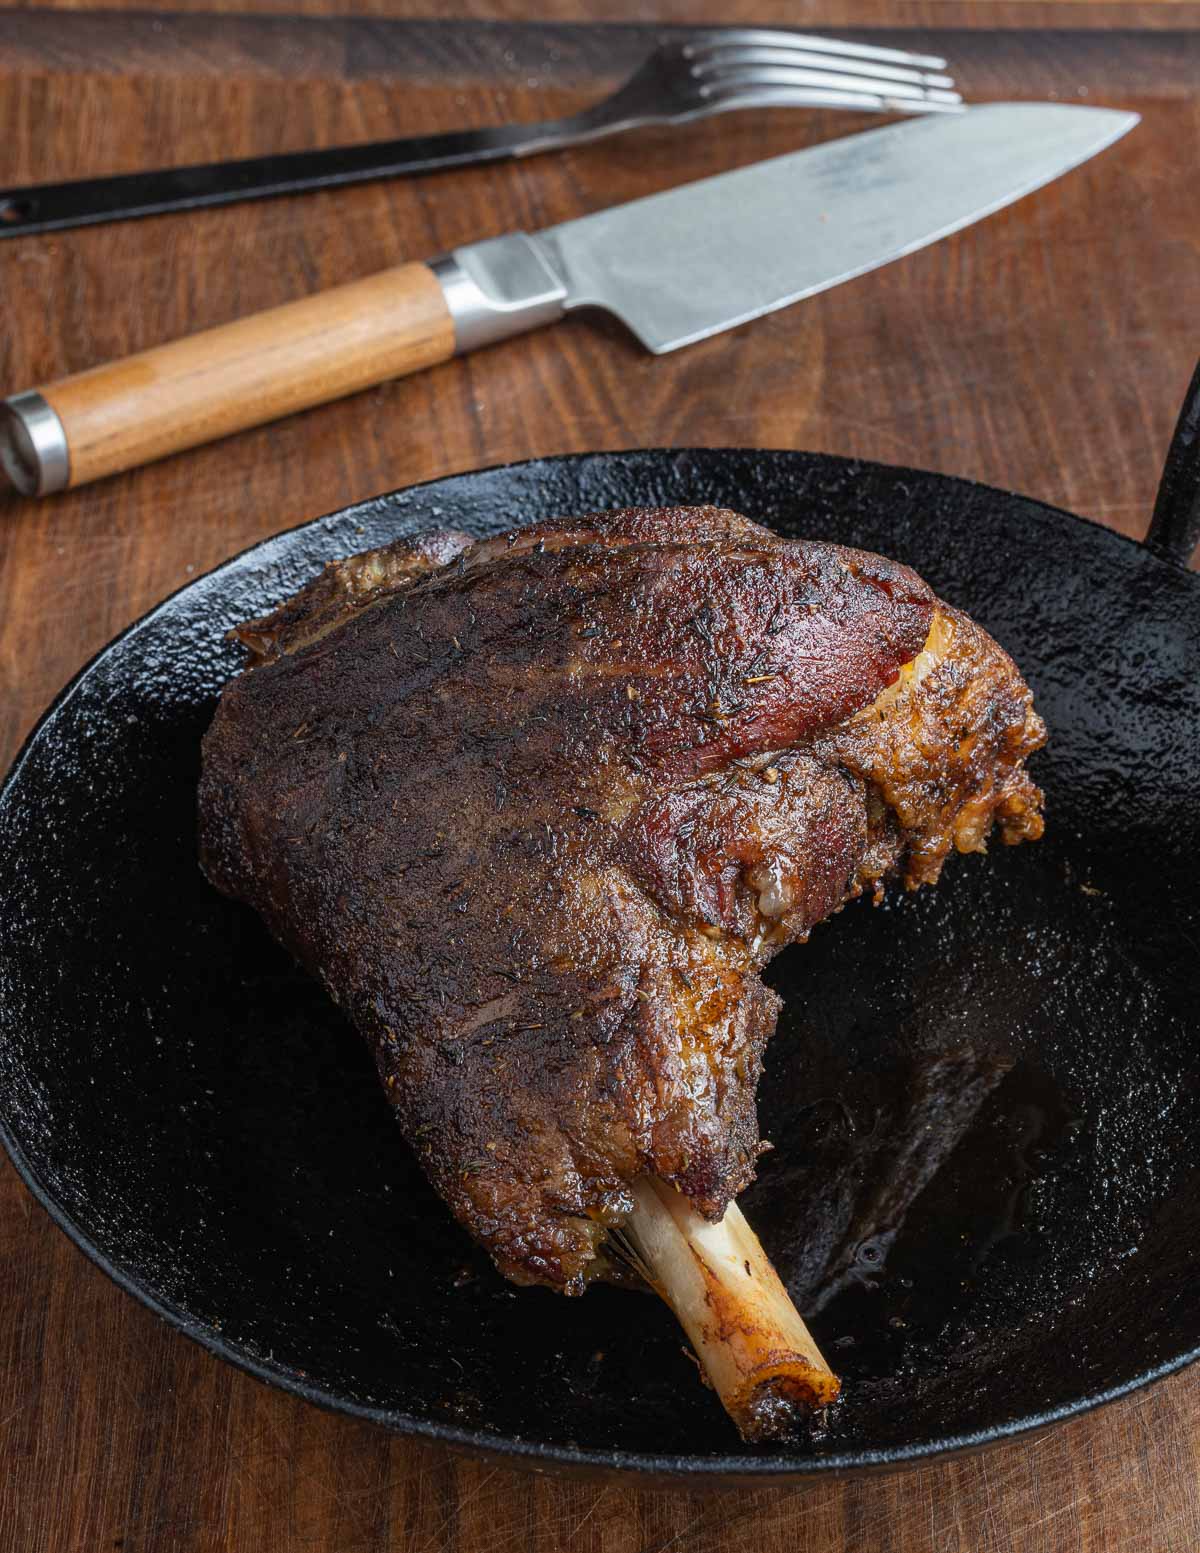 A smoked lamb shank in a kehoe carbon steel pan with a knife in the background.